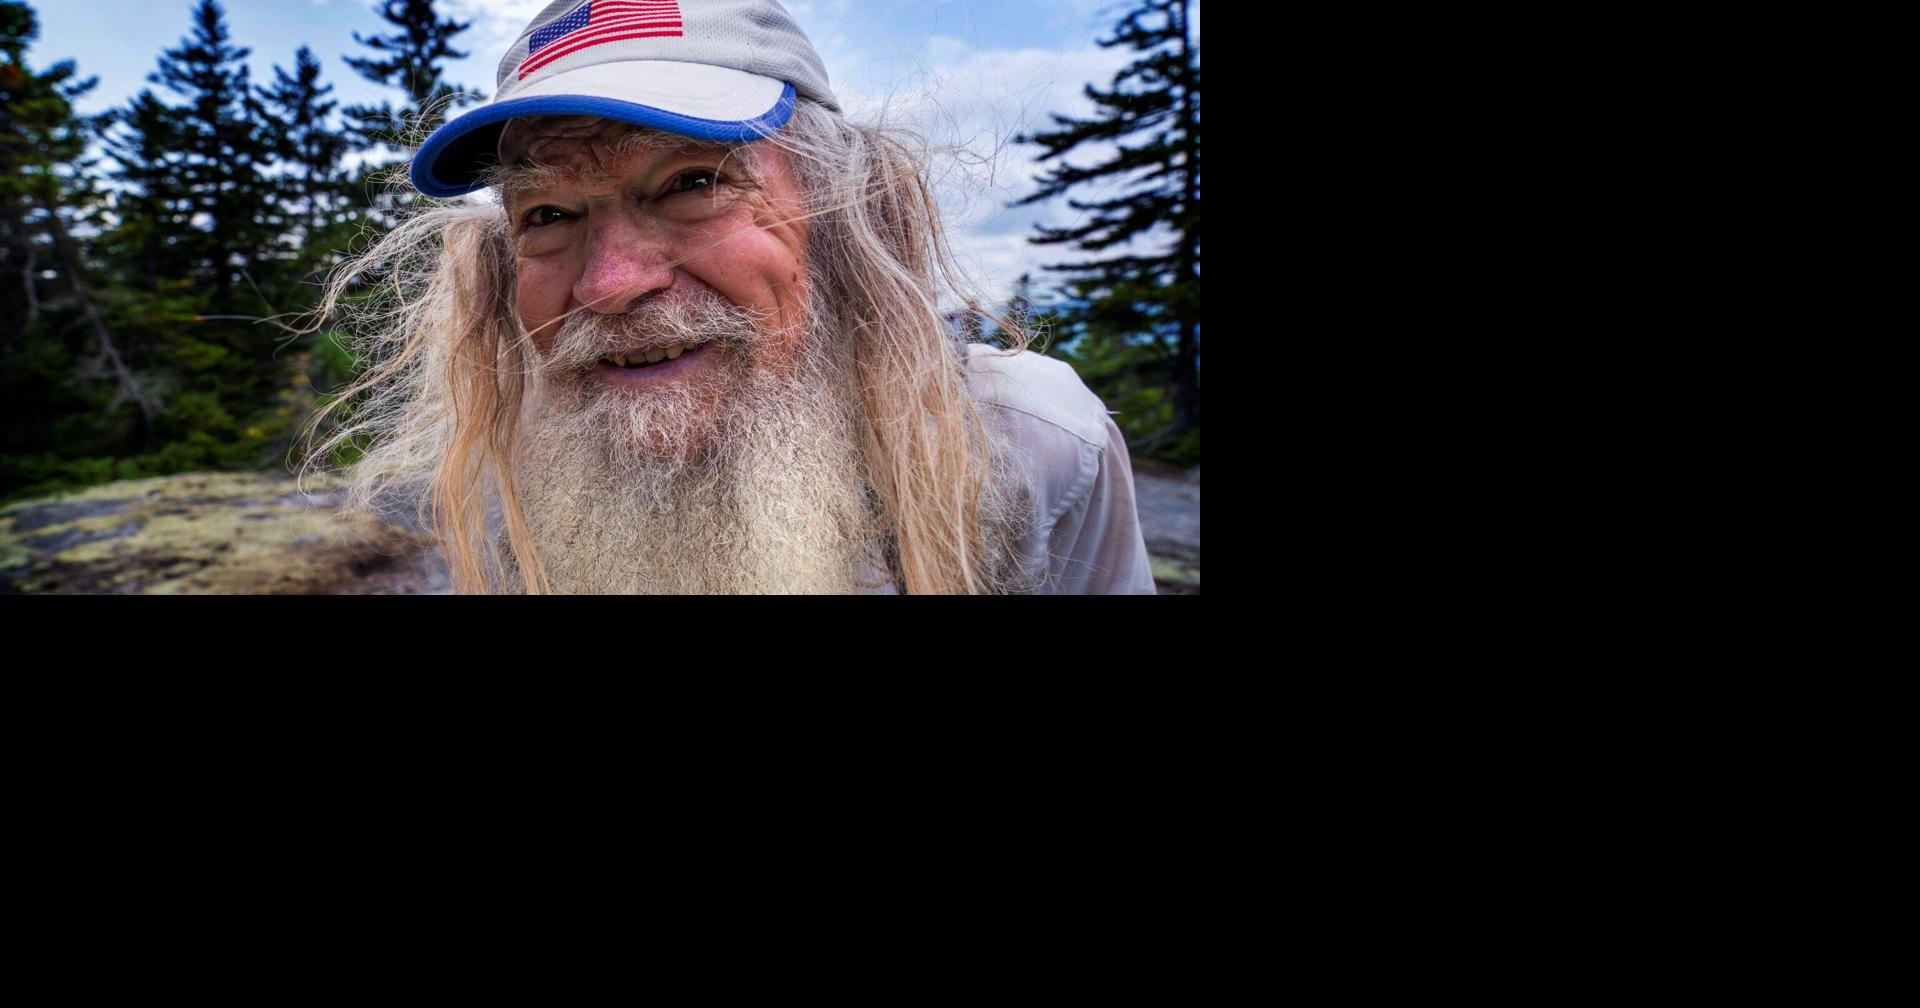 Nimblewill Nomad 83 Becomes Oldest Hiker To Complete Appalachian Trail